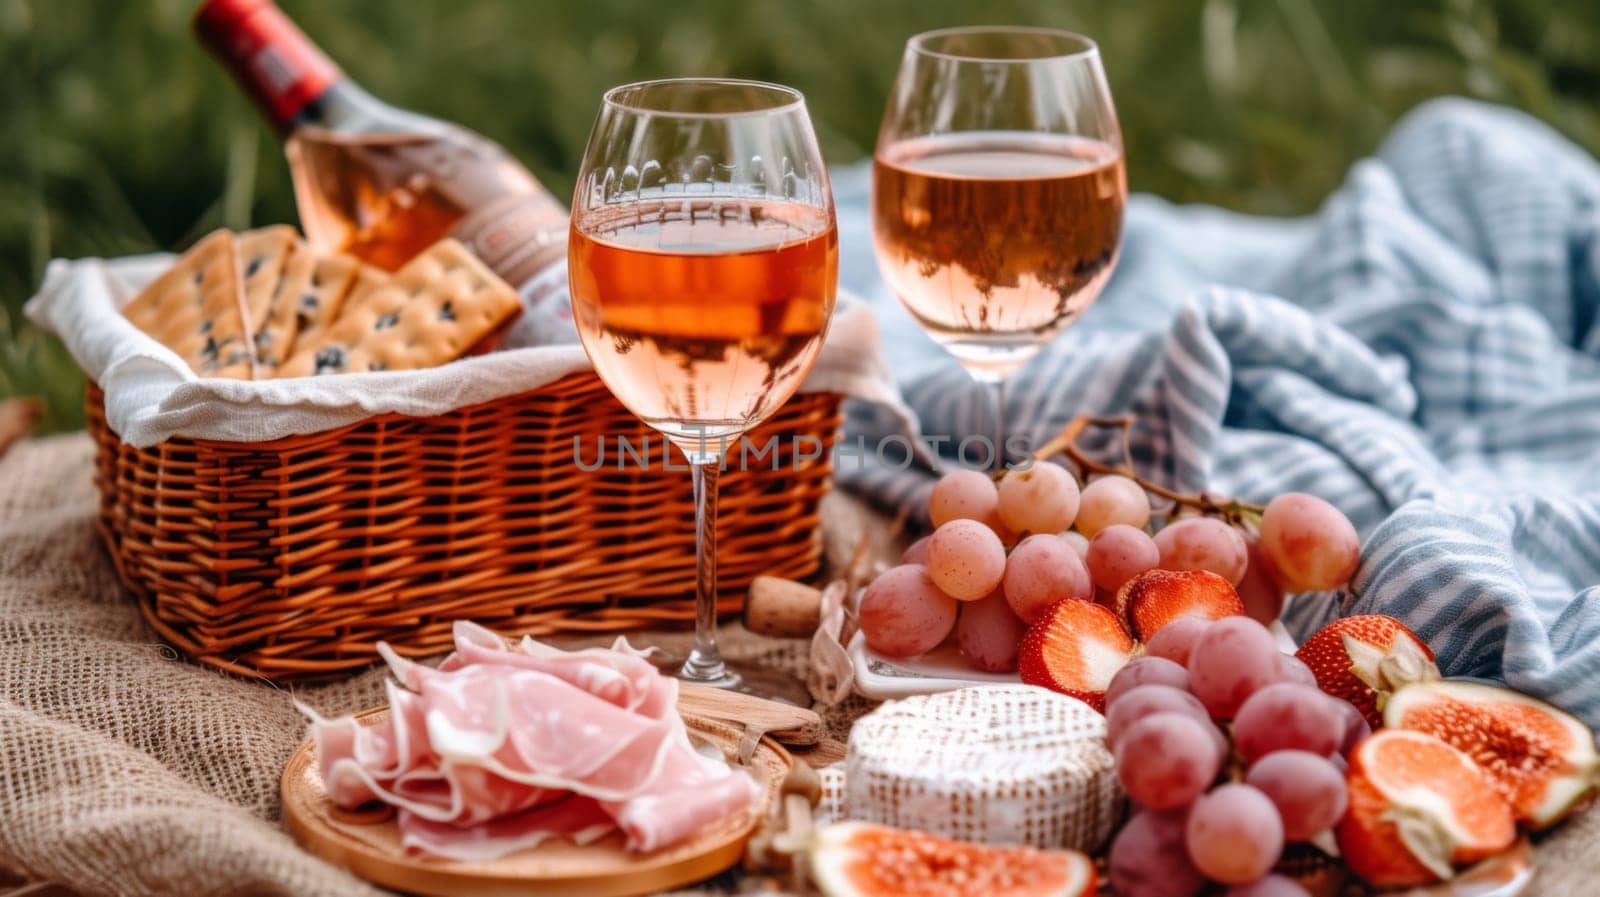 A picnic with wine and fruit on a blanket in the park